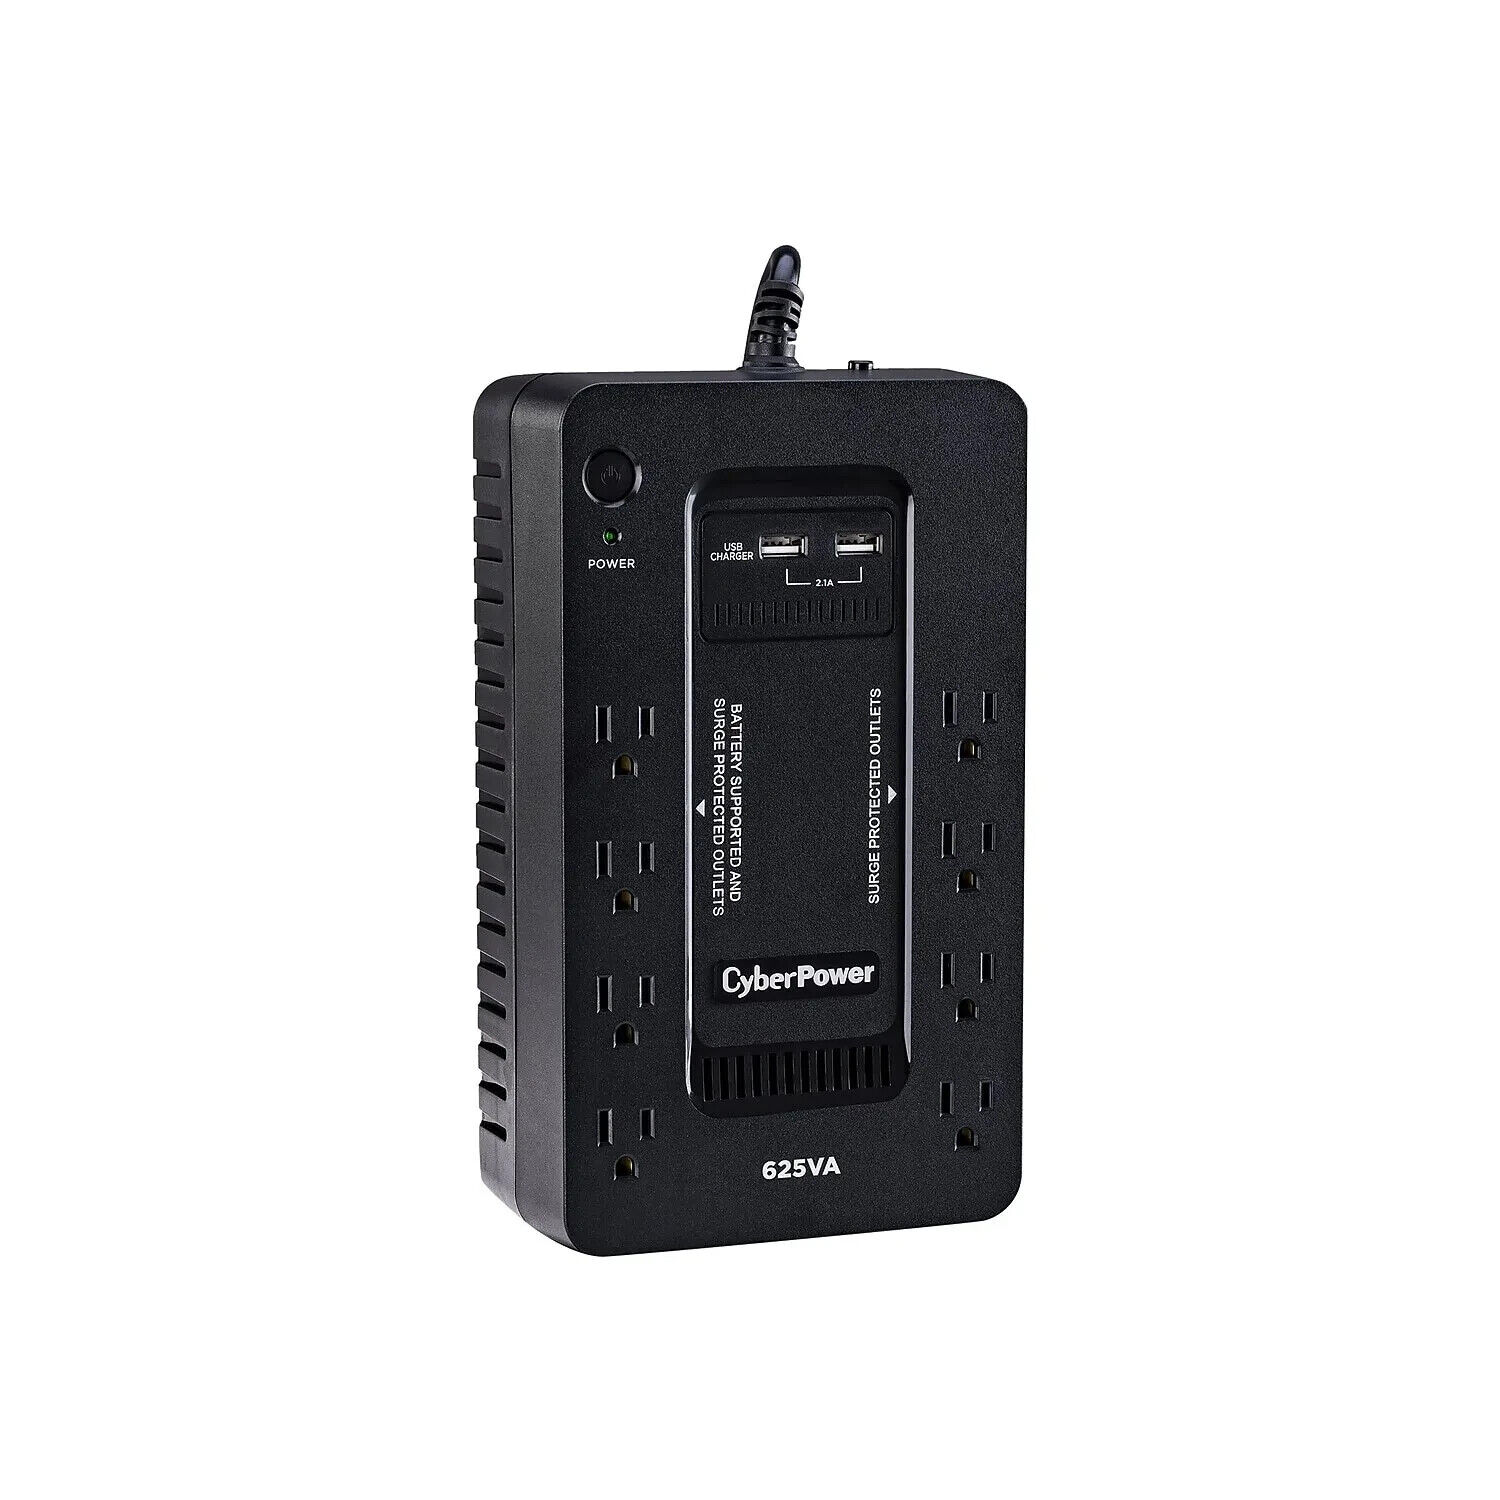 CyberPower Standby Series 625VA 8-Outlet UPS Black (ST625U)